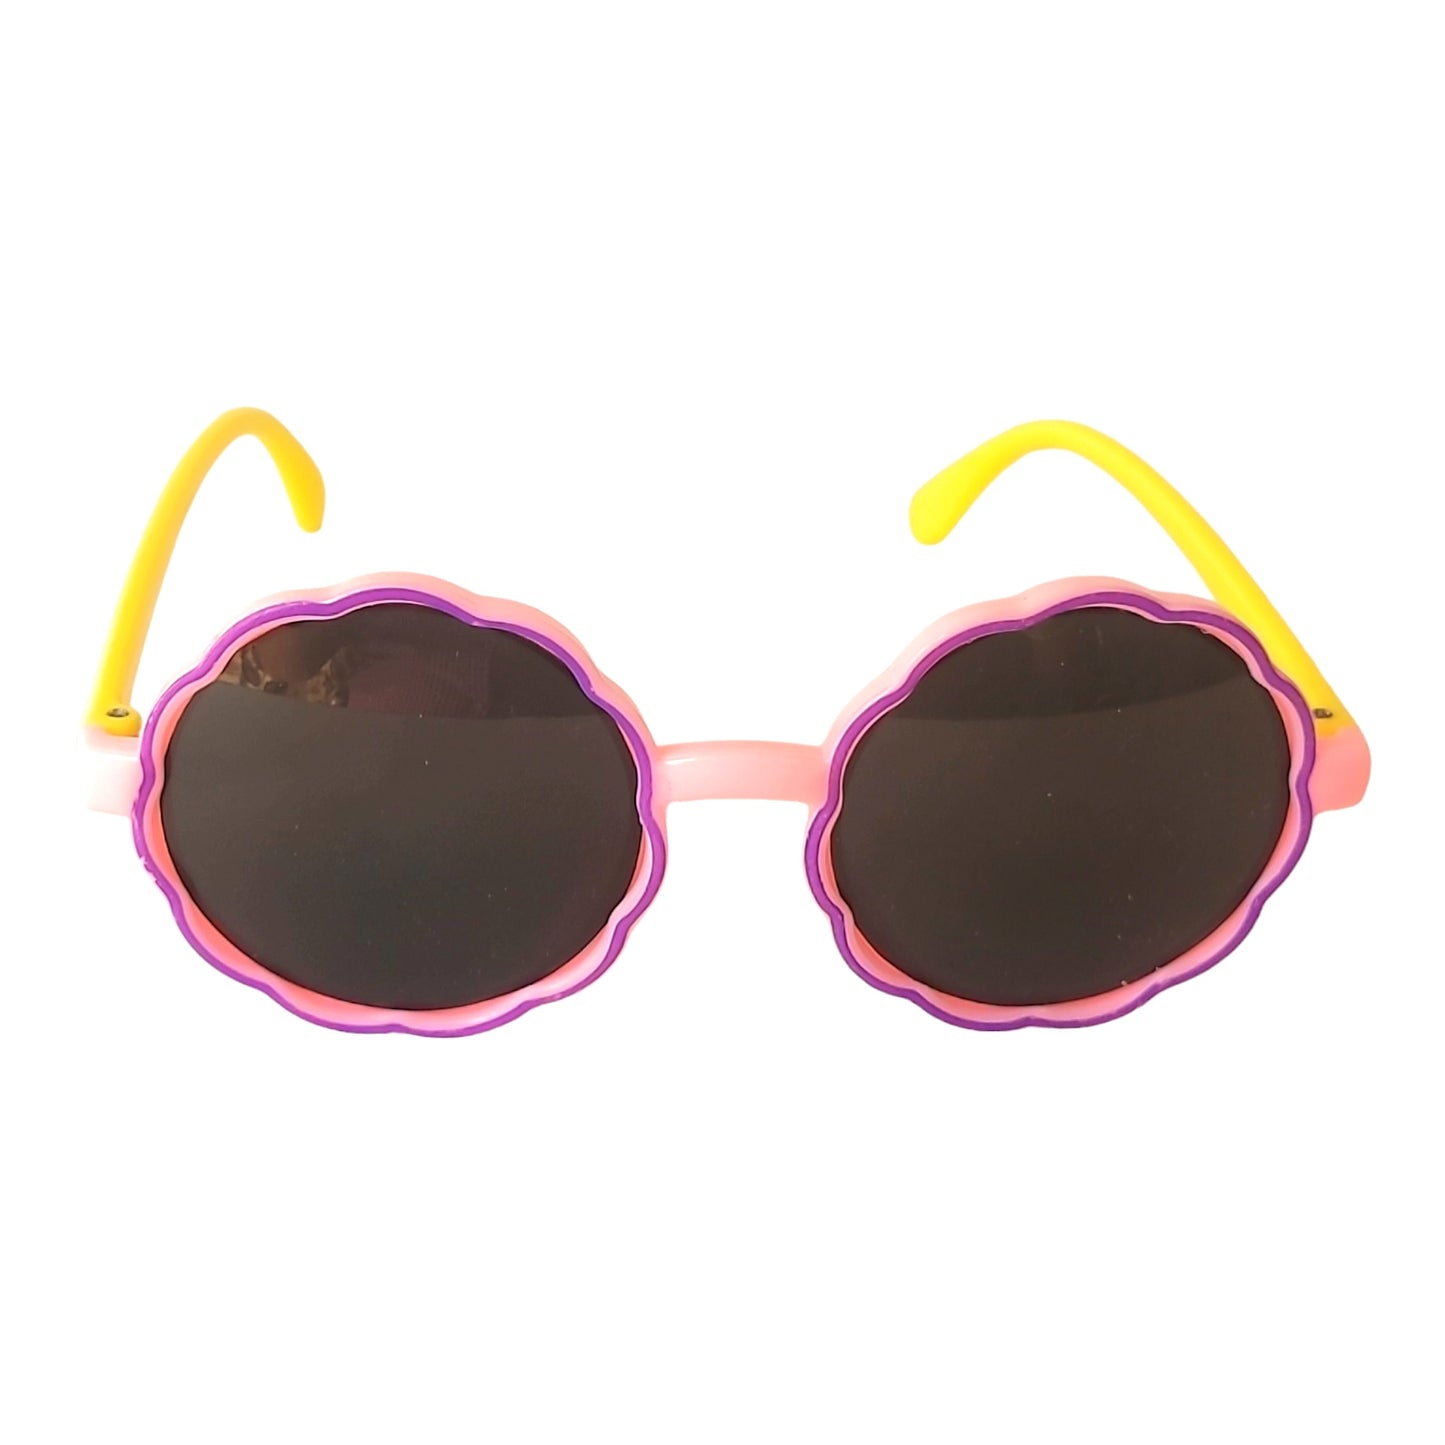 Round sunglasses for Kids ( 3yrs to 8yrs ) – affaires-2032-Pink-Yellow